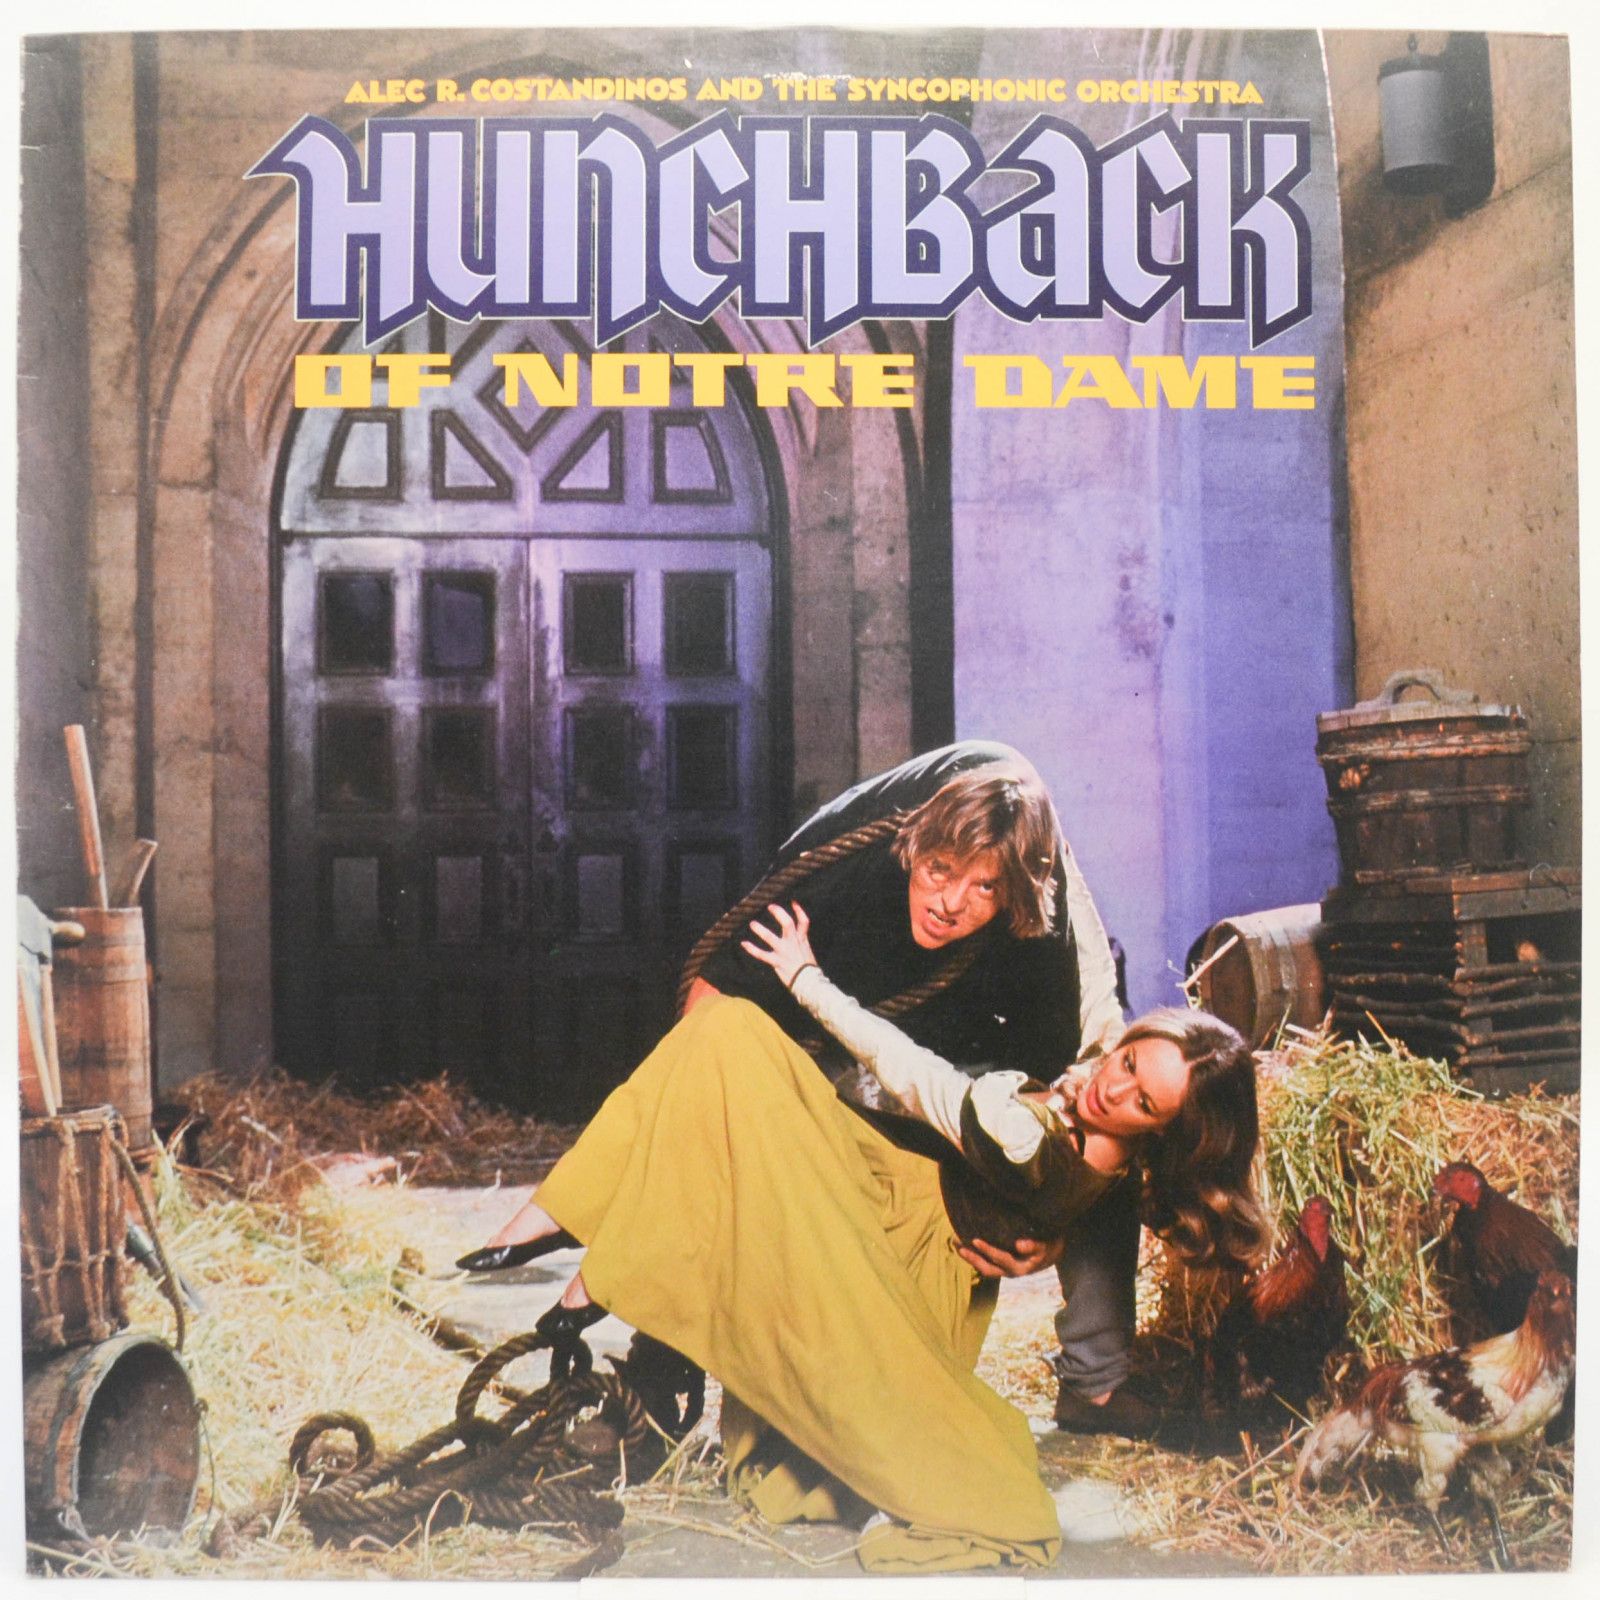 Alec R. Costandinos And The Syncophonic Orchestra — The Hunchback Of Notre Dame, 1978